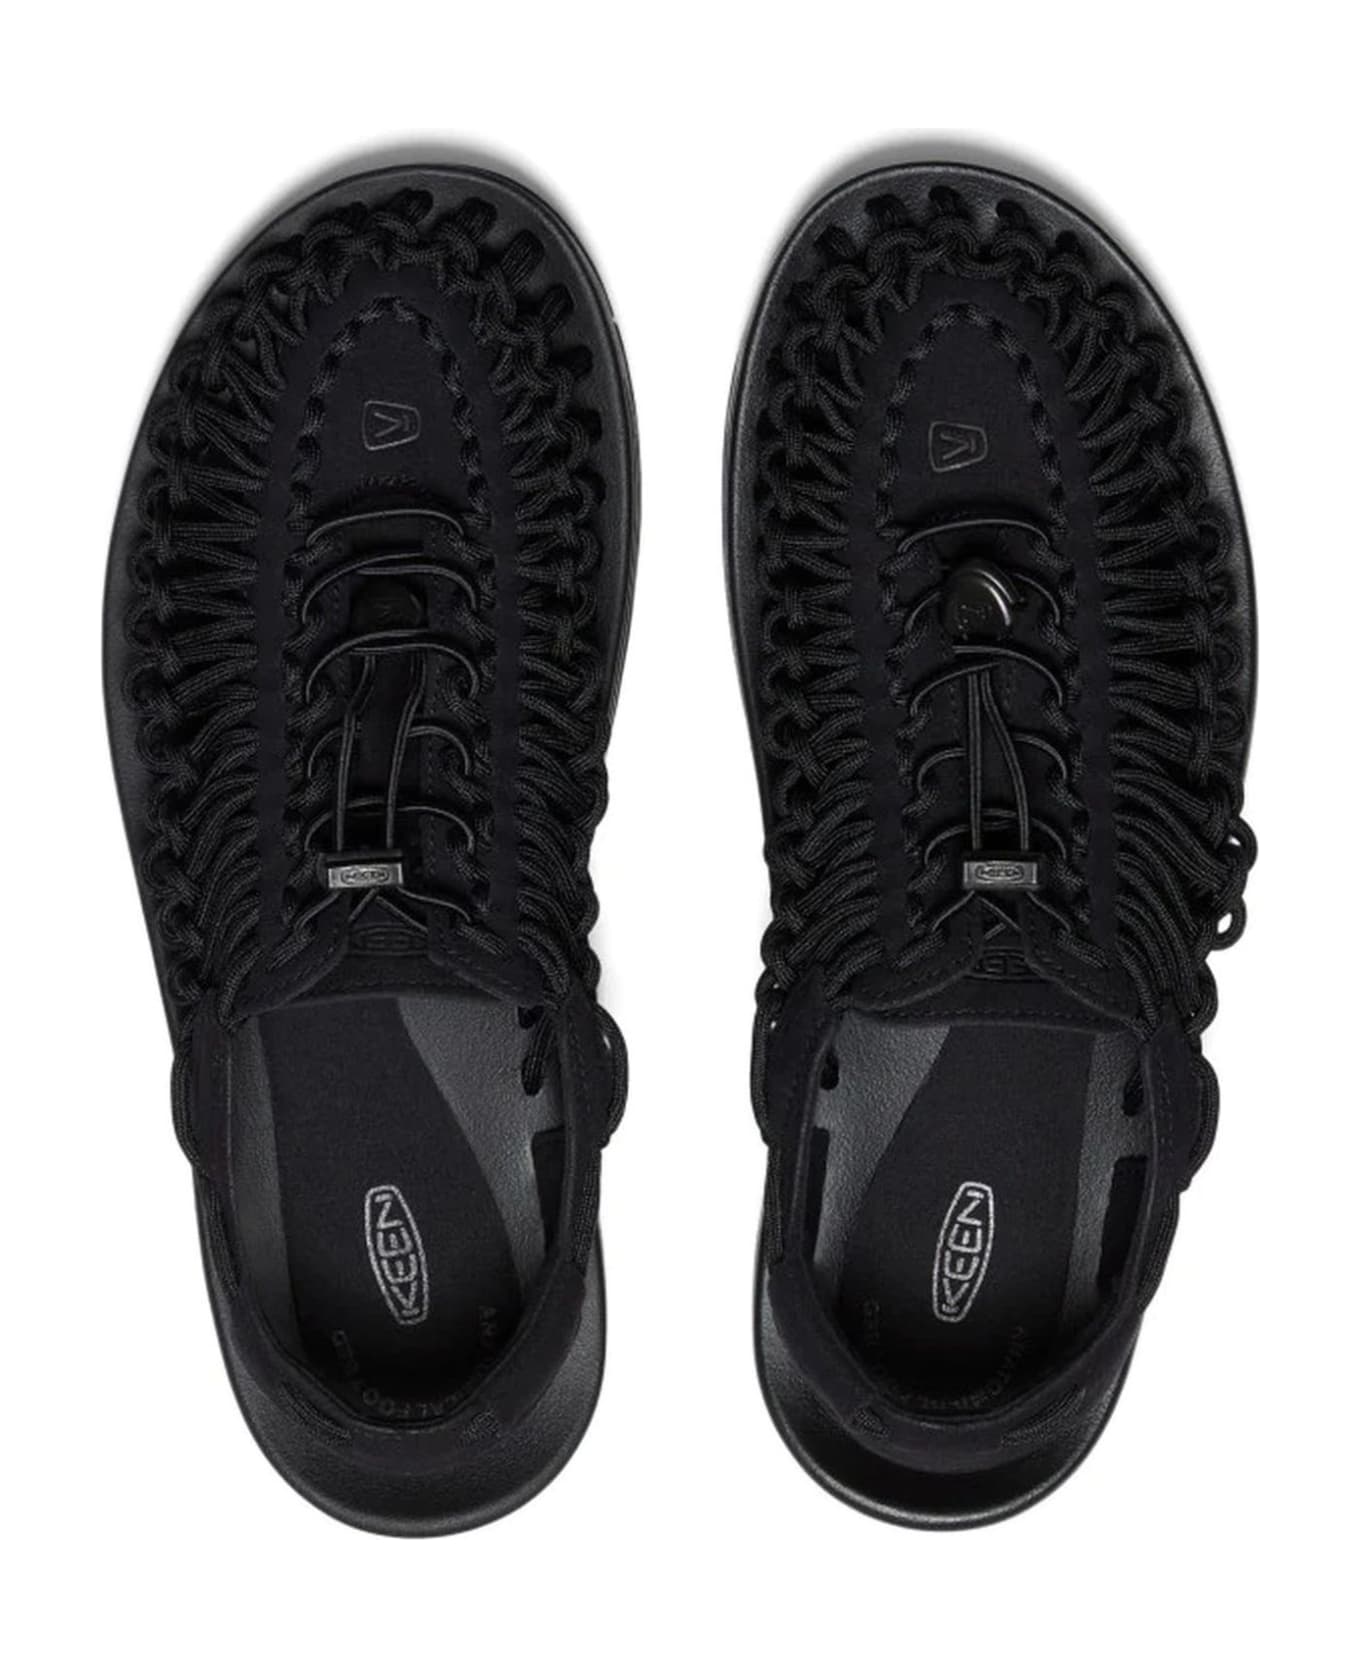 Keen Black Two-cord Construction Sandals - Nero その他各種シューズ